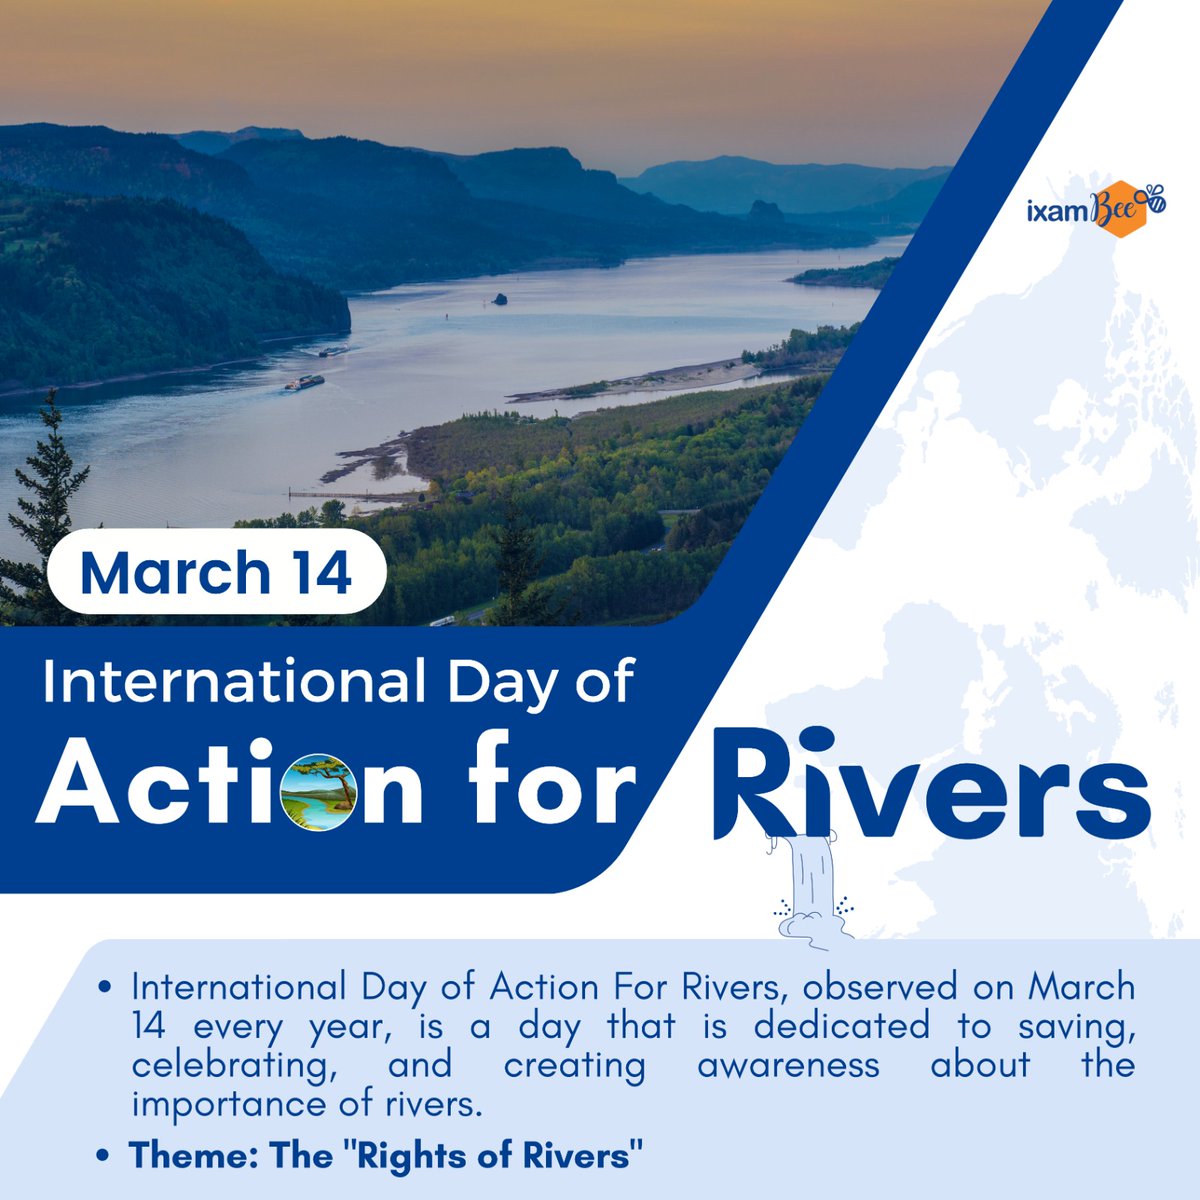 Importance of the Day

#internationaldayofactionforrivers #rivers #ixambee #explore #rightsofrivers #trending #awareness #riverside #actionforrivers #international #InternationalDayofActionforRivers #rivers2023